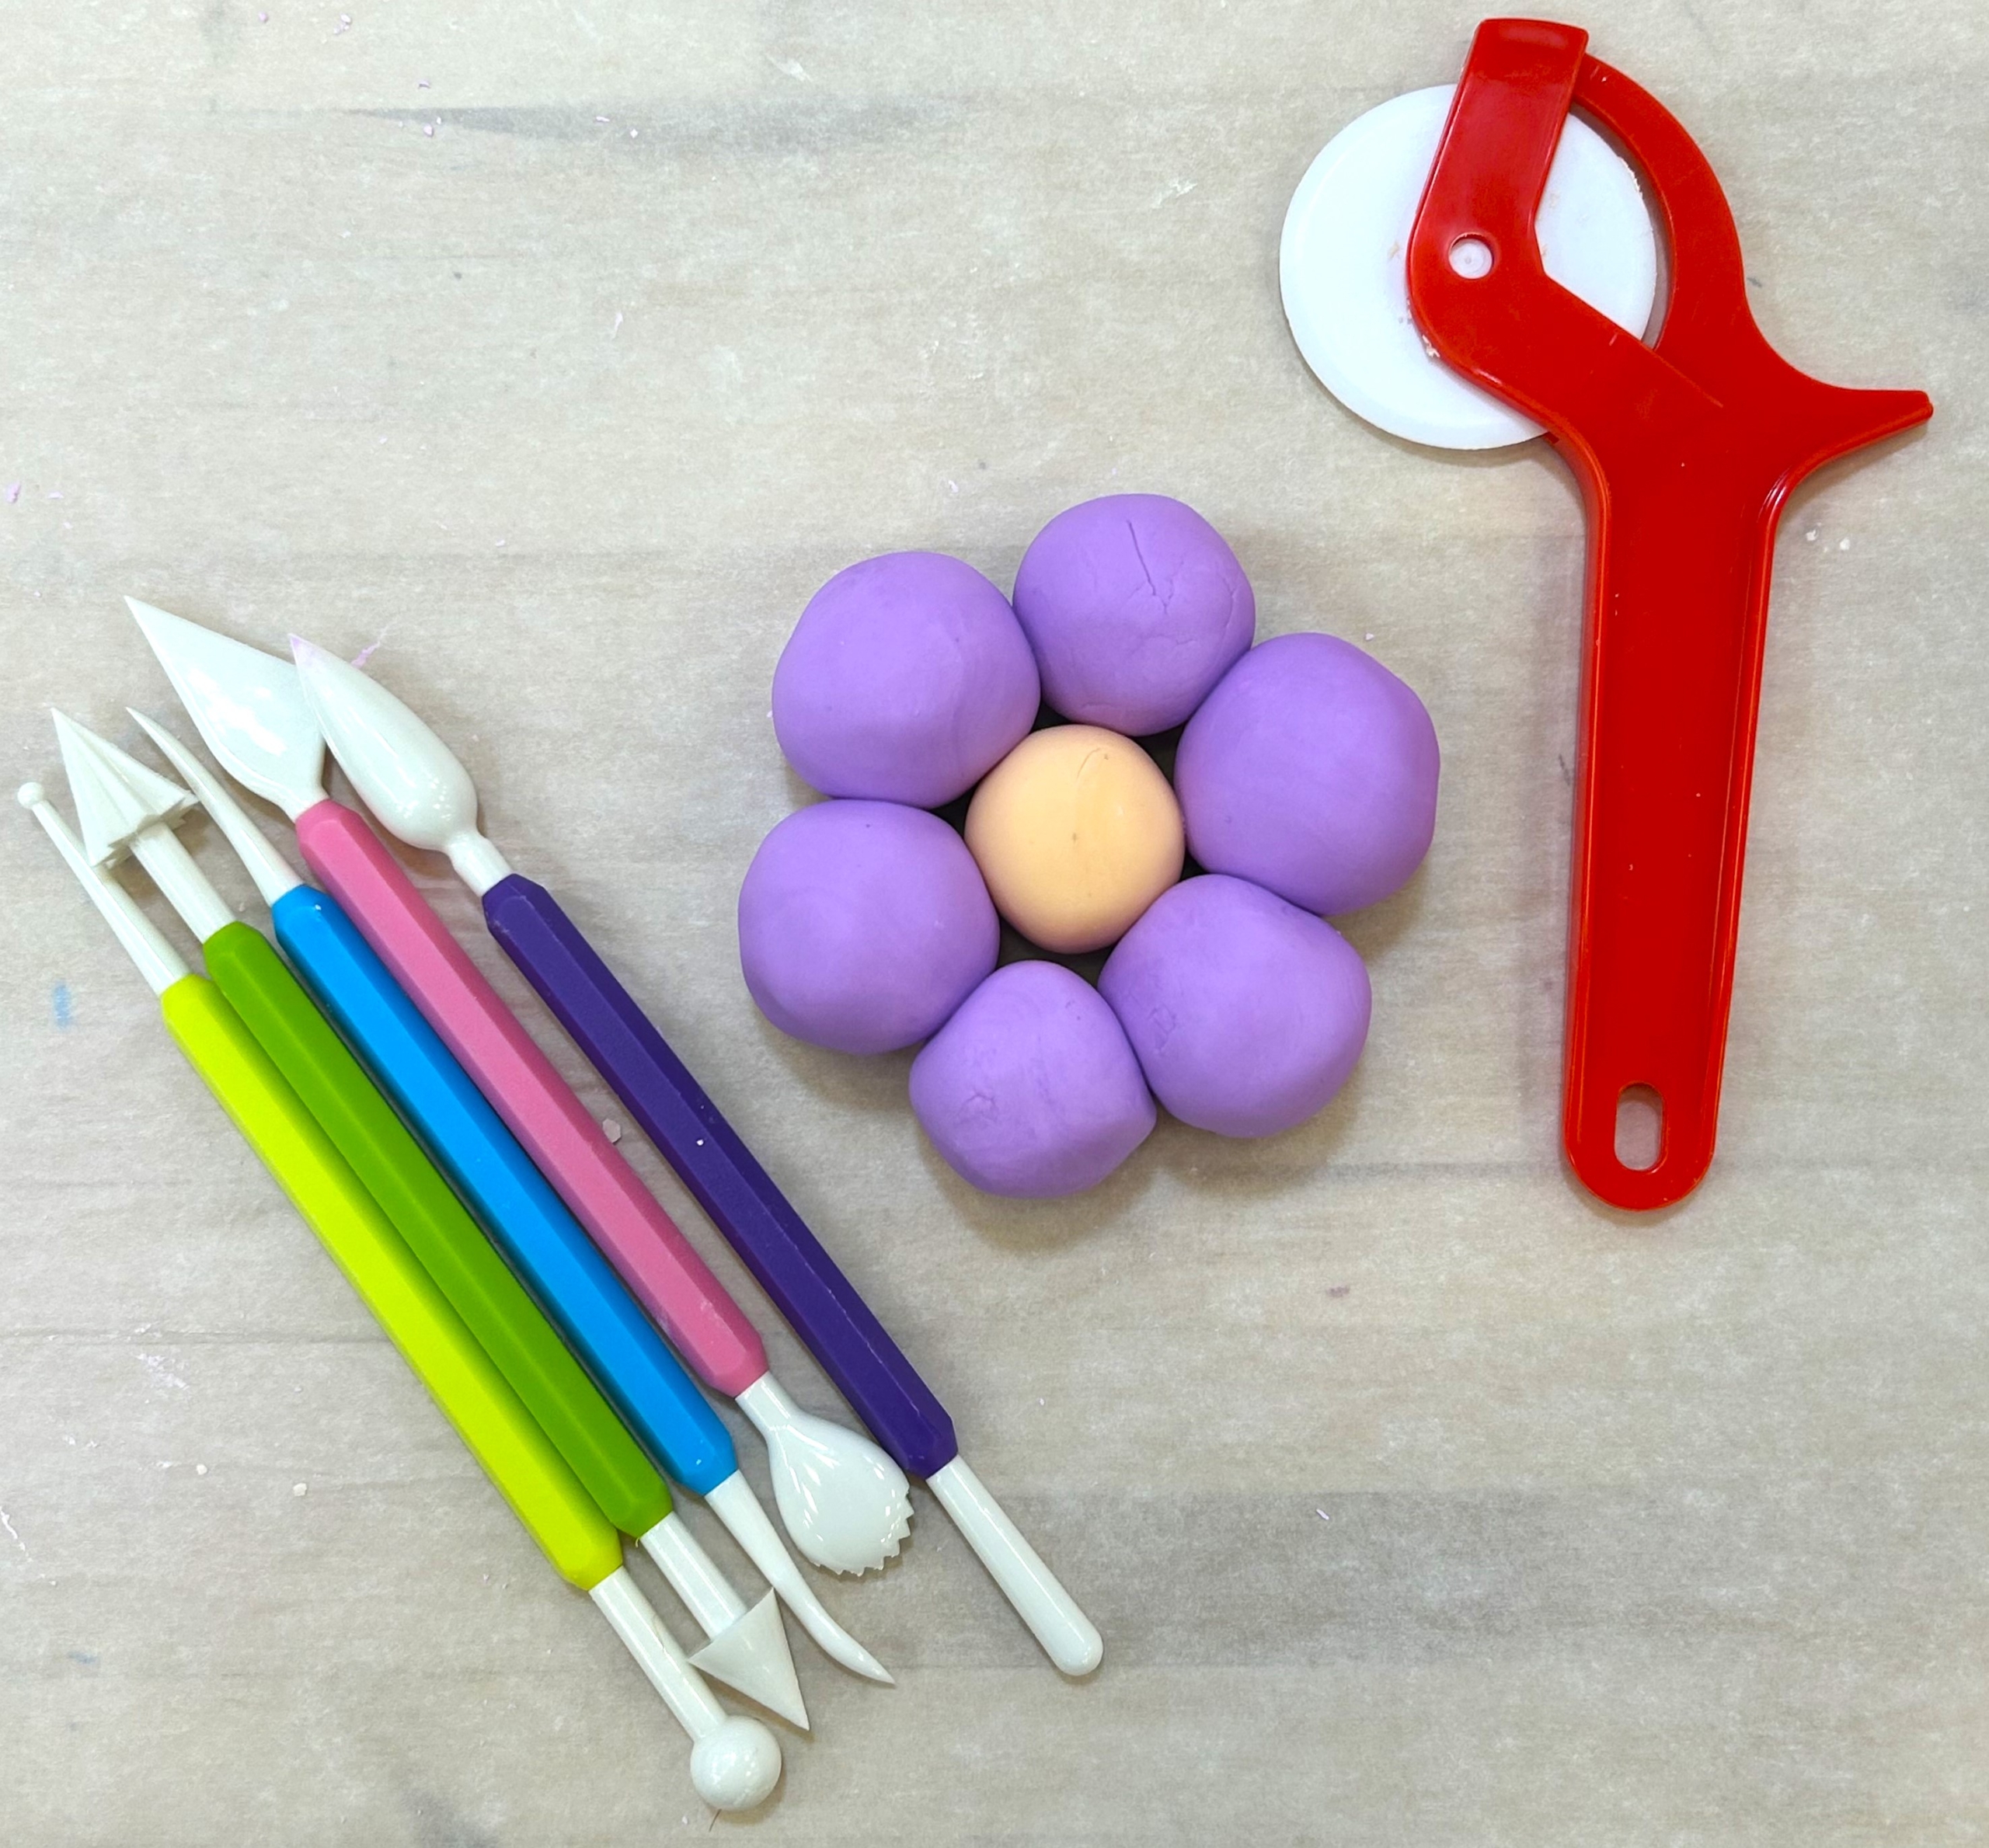 A purple and yellow flower made of cloud dough sits on a table around various tools used to shape clay.